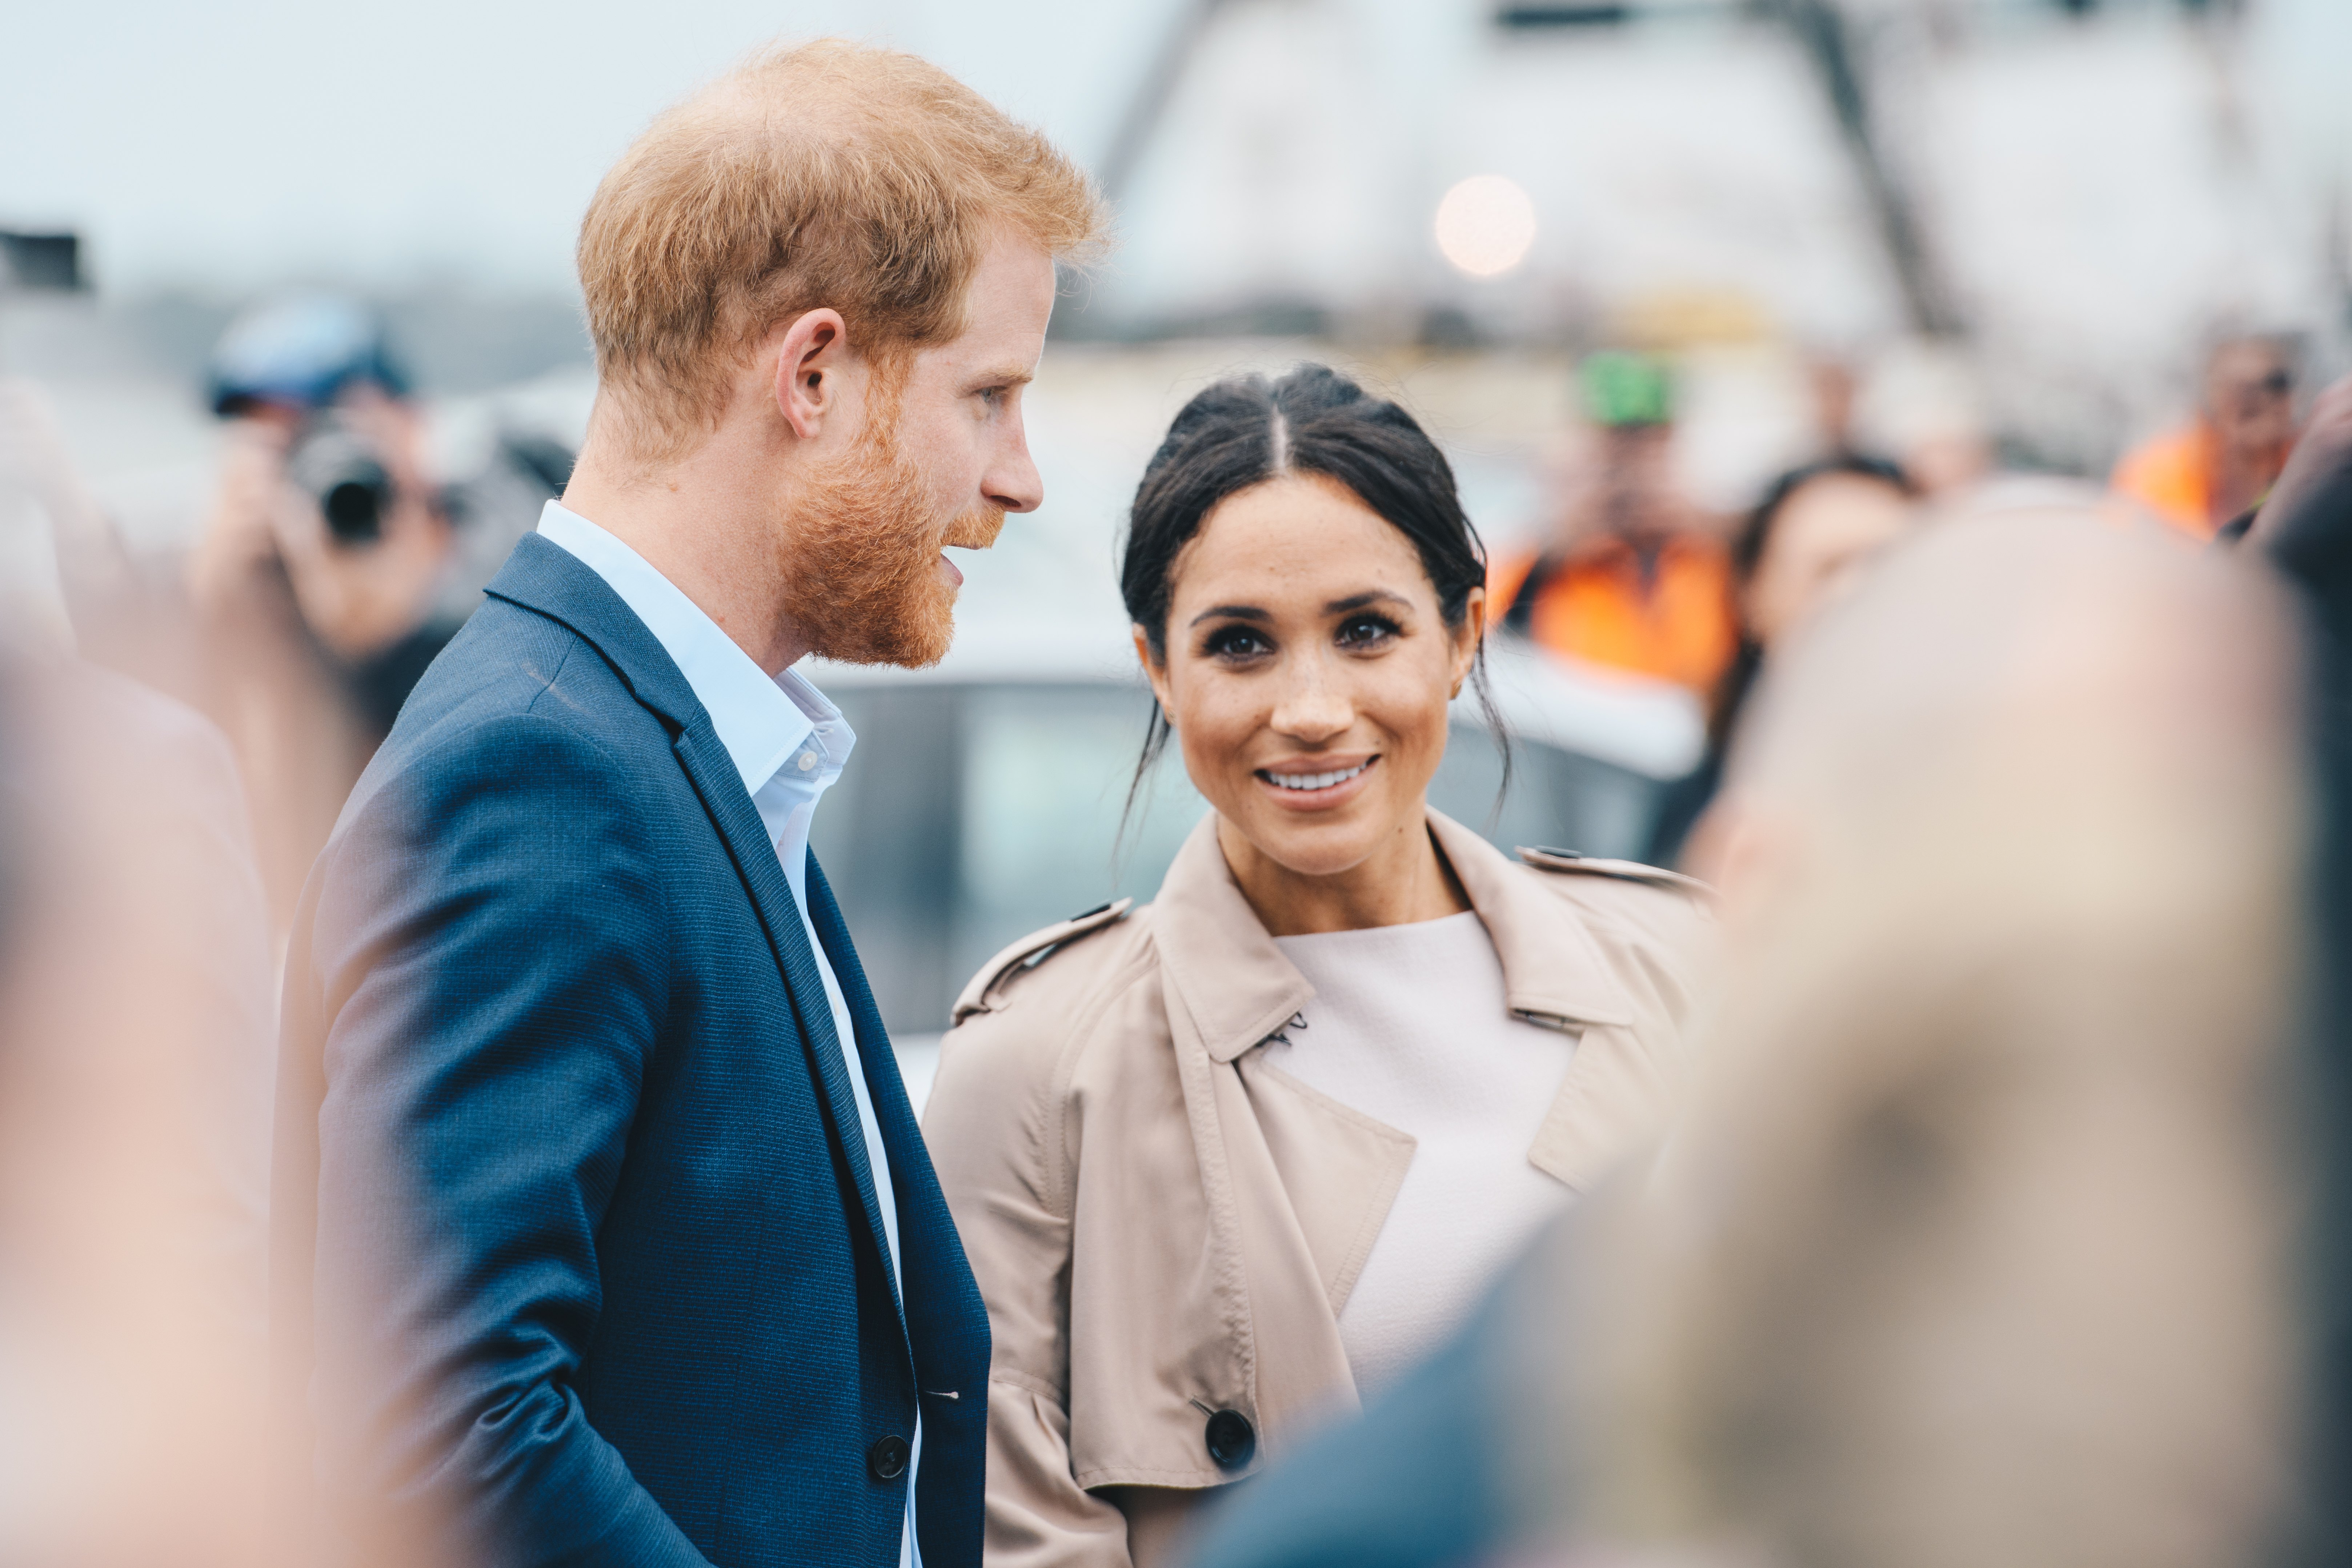 How to Watch Oprah Winfrey’s Interview with Prince Harry and Meghan Markle Online